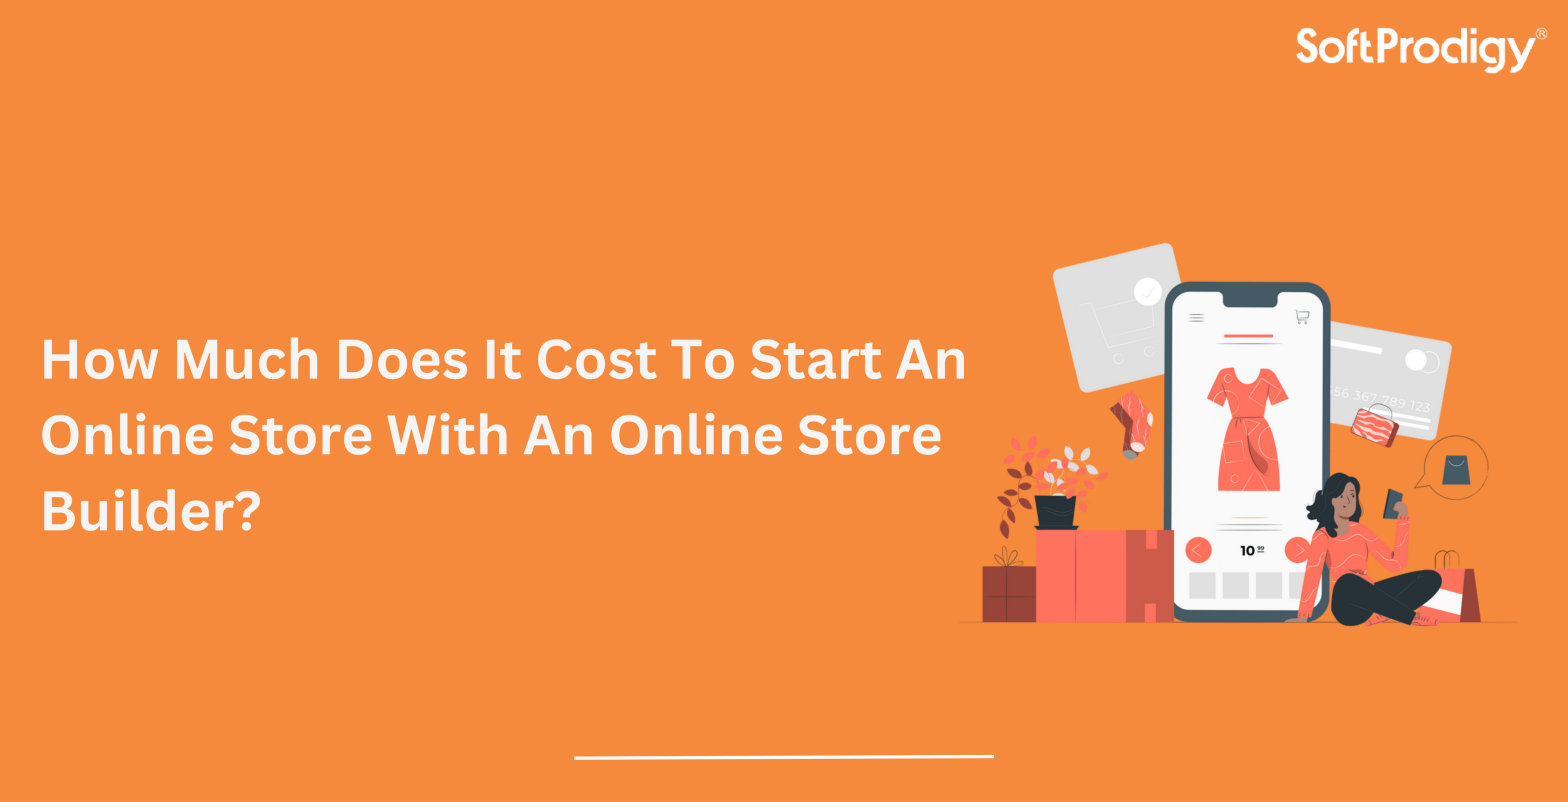 How Much Does It Cost To Start An Online Store?